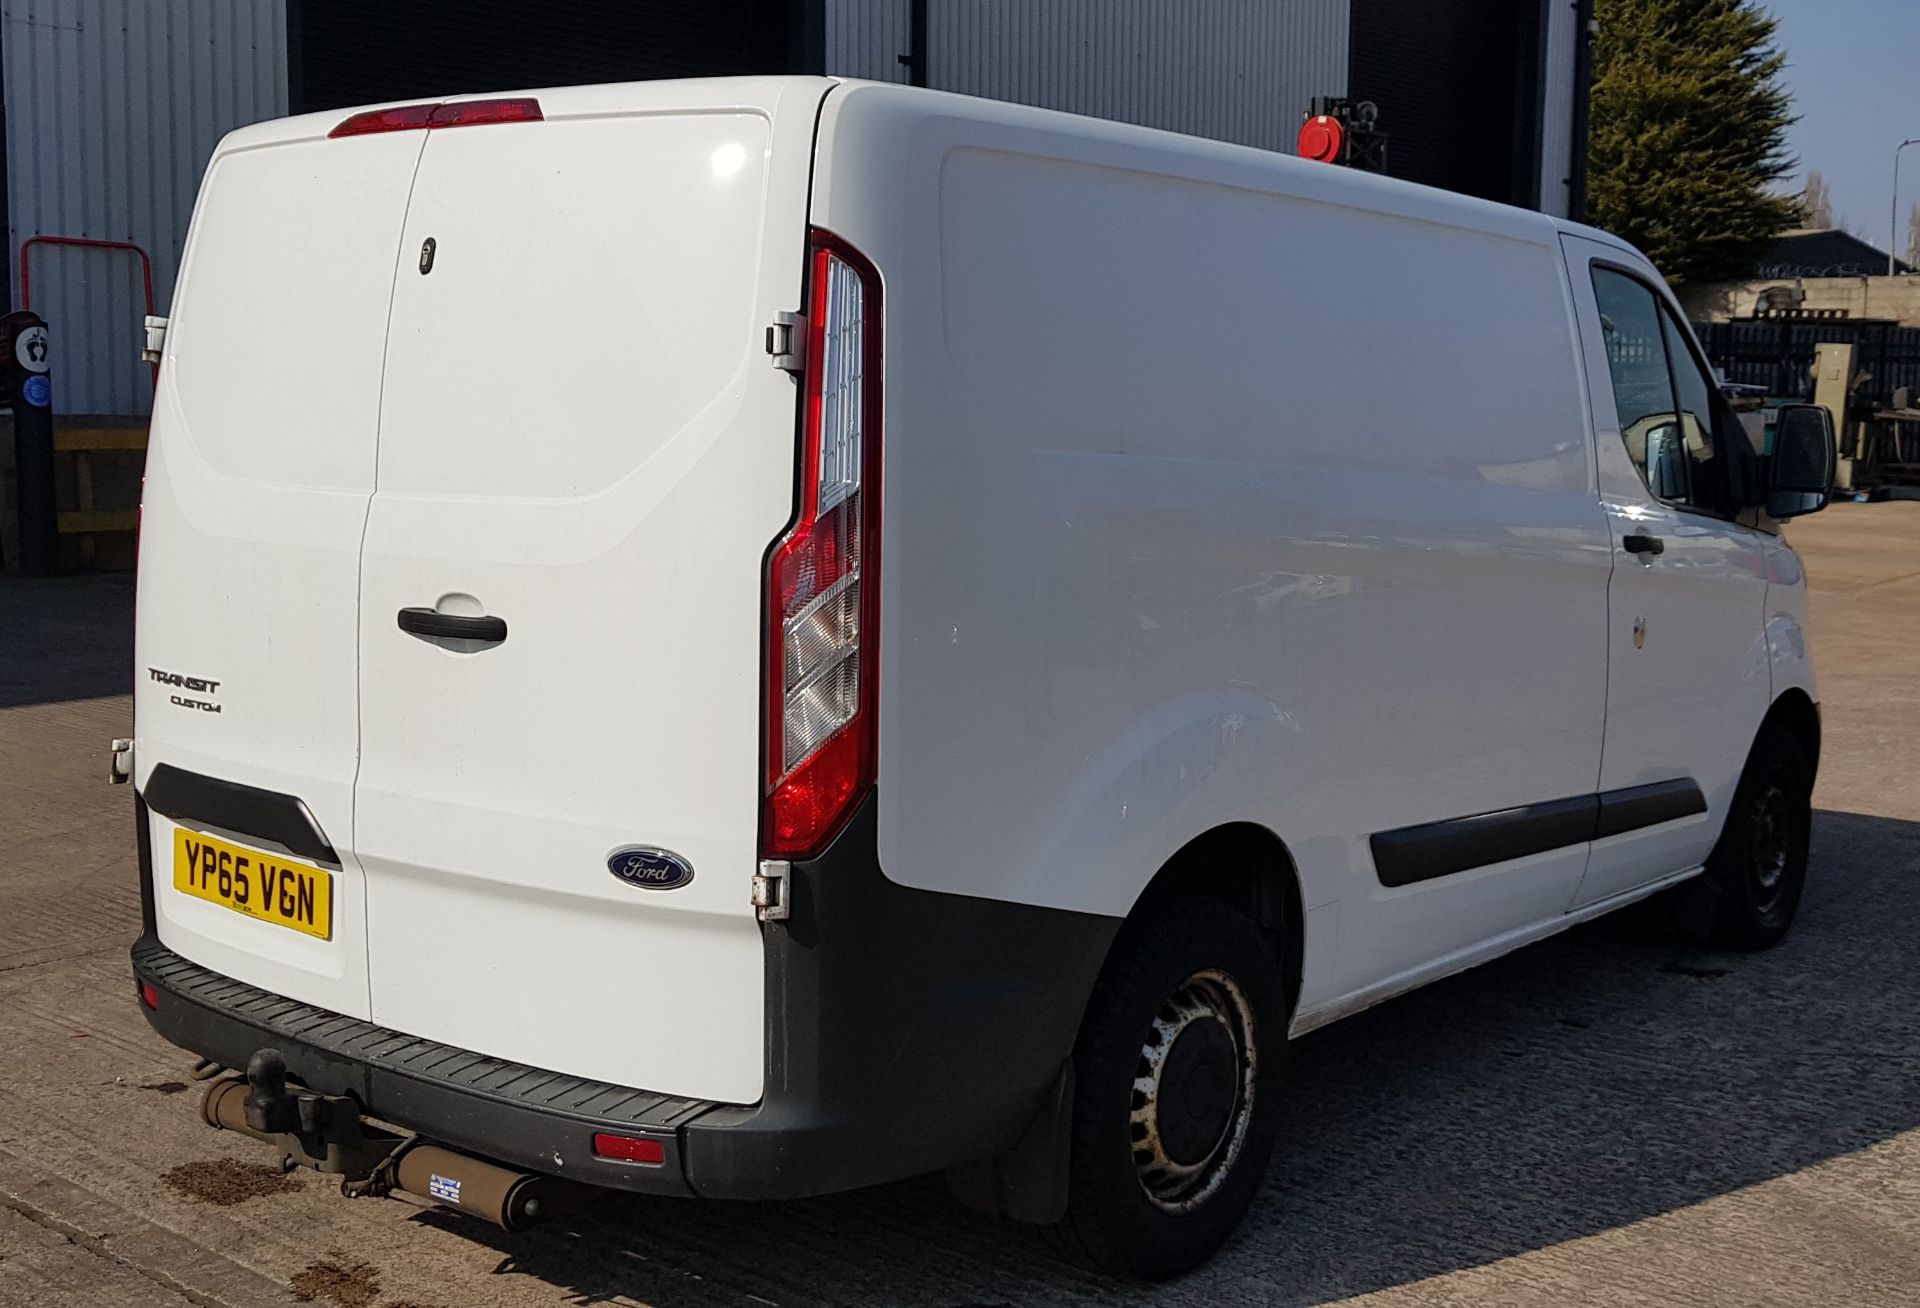 WHITE FORD TRANSIT CUSTOM 270 ECO TECH. ( DIESEL ) Reg : YP65 VGN, Mileage : 93,455 Details: FIRST - Image 4 of 13